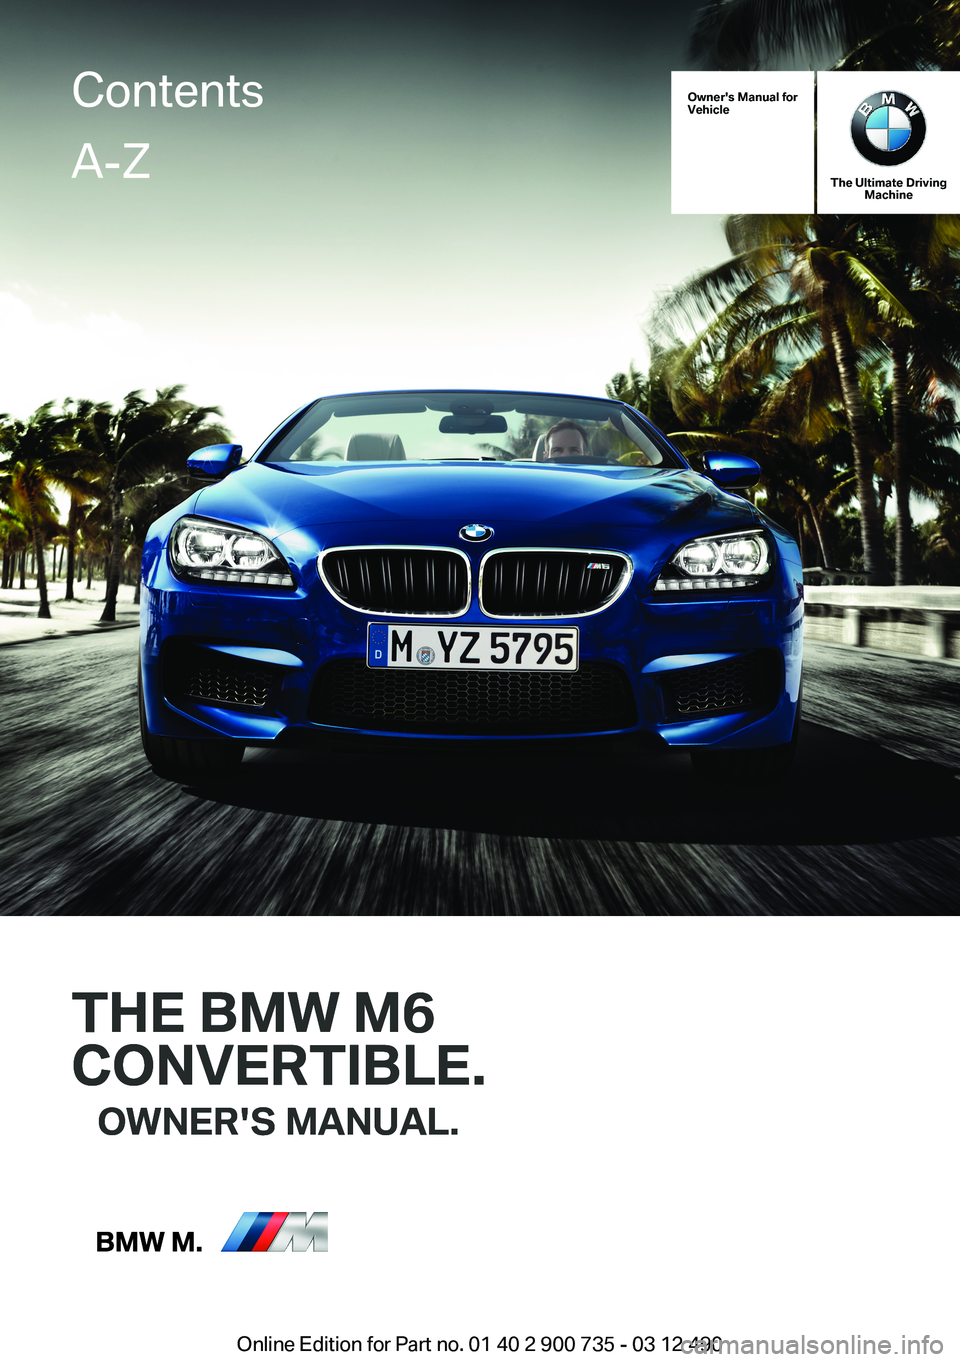 BMW M6 CONVERTIBLE 2012  Owners Manual Owner's Manual forVehicle
THE BMW M6
CONVERTIBLE.
OWNER'S MANUAL.
The Ultimate DrivingMachine
THE BMW M6
CONVERTIBLE.
OWNER'S MANUAL.
ContentsA-Z
Online Edition for Part no. 01 40 2 900 73